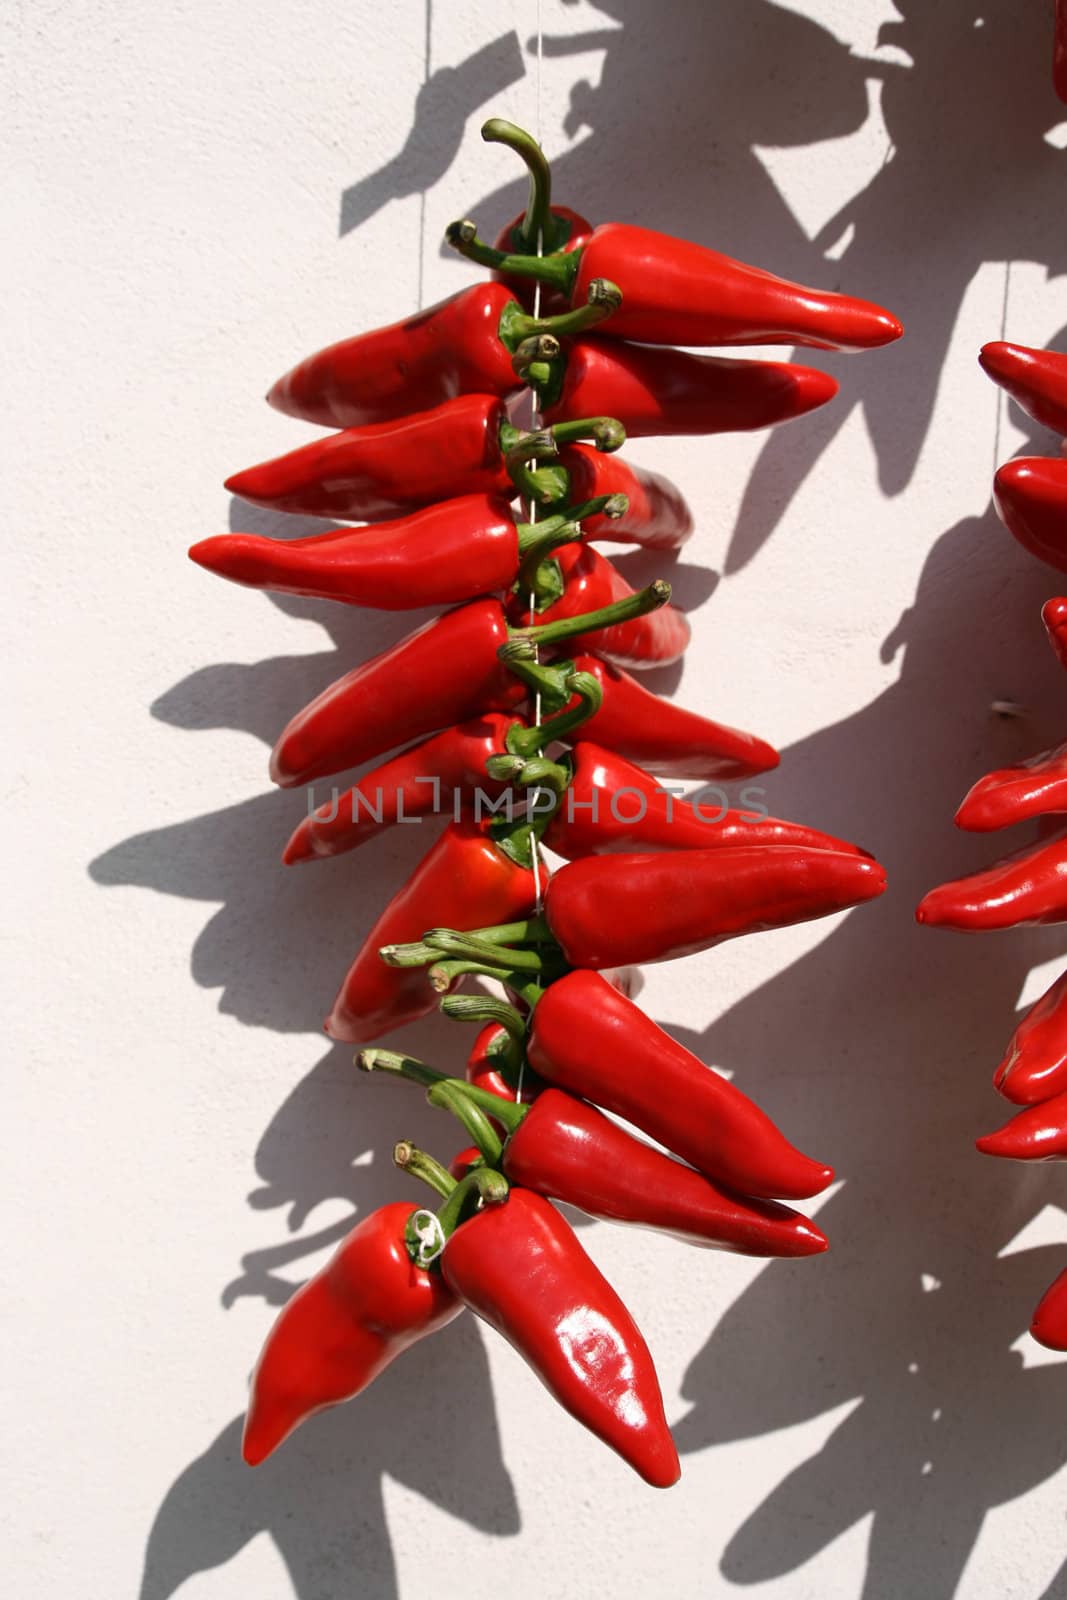 drying pepper bunches by daboost